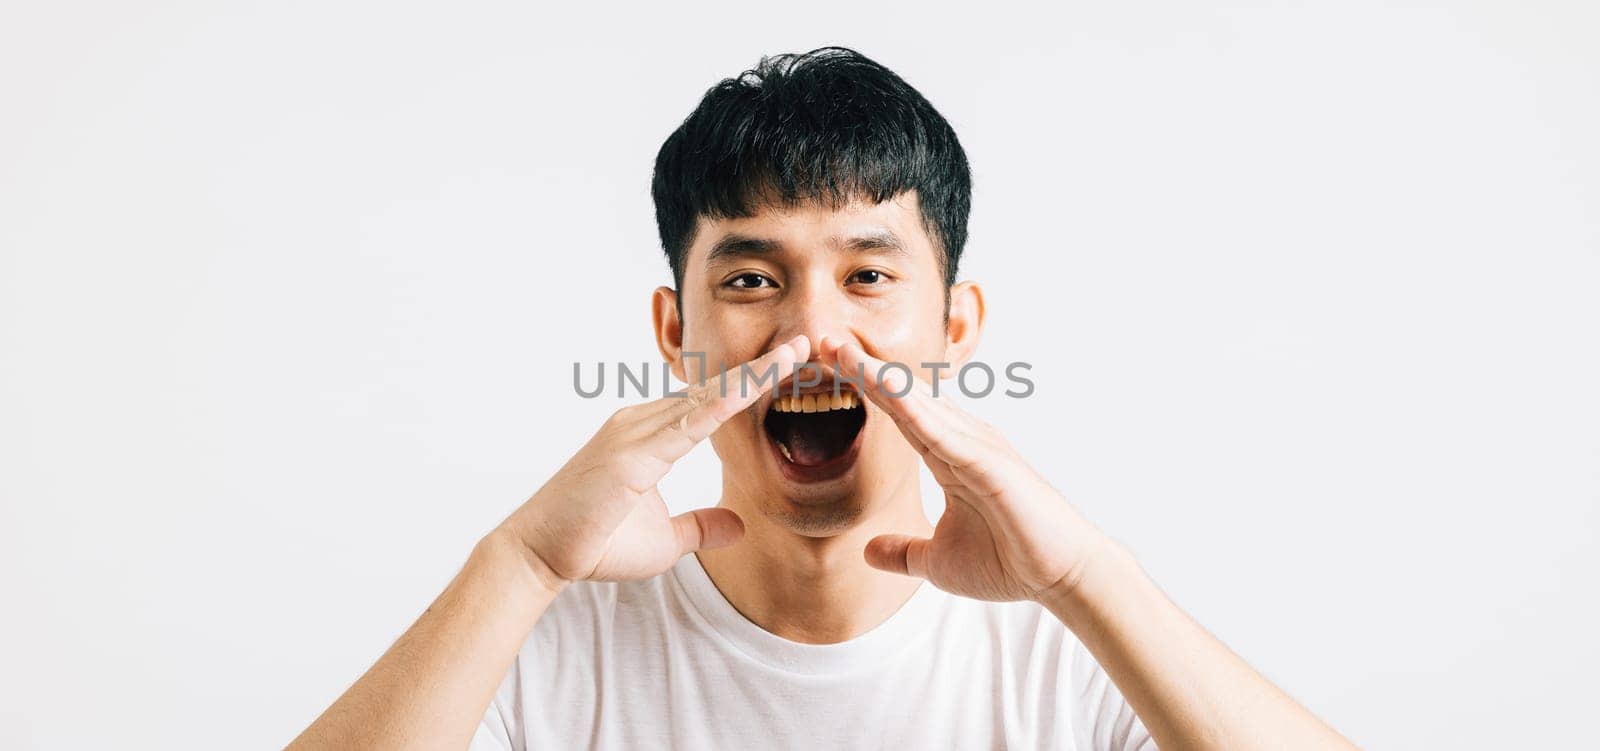 Portrait of a cheerful Asian youth, hand on mouth, talking about news or announcements by Sorapop